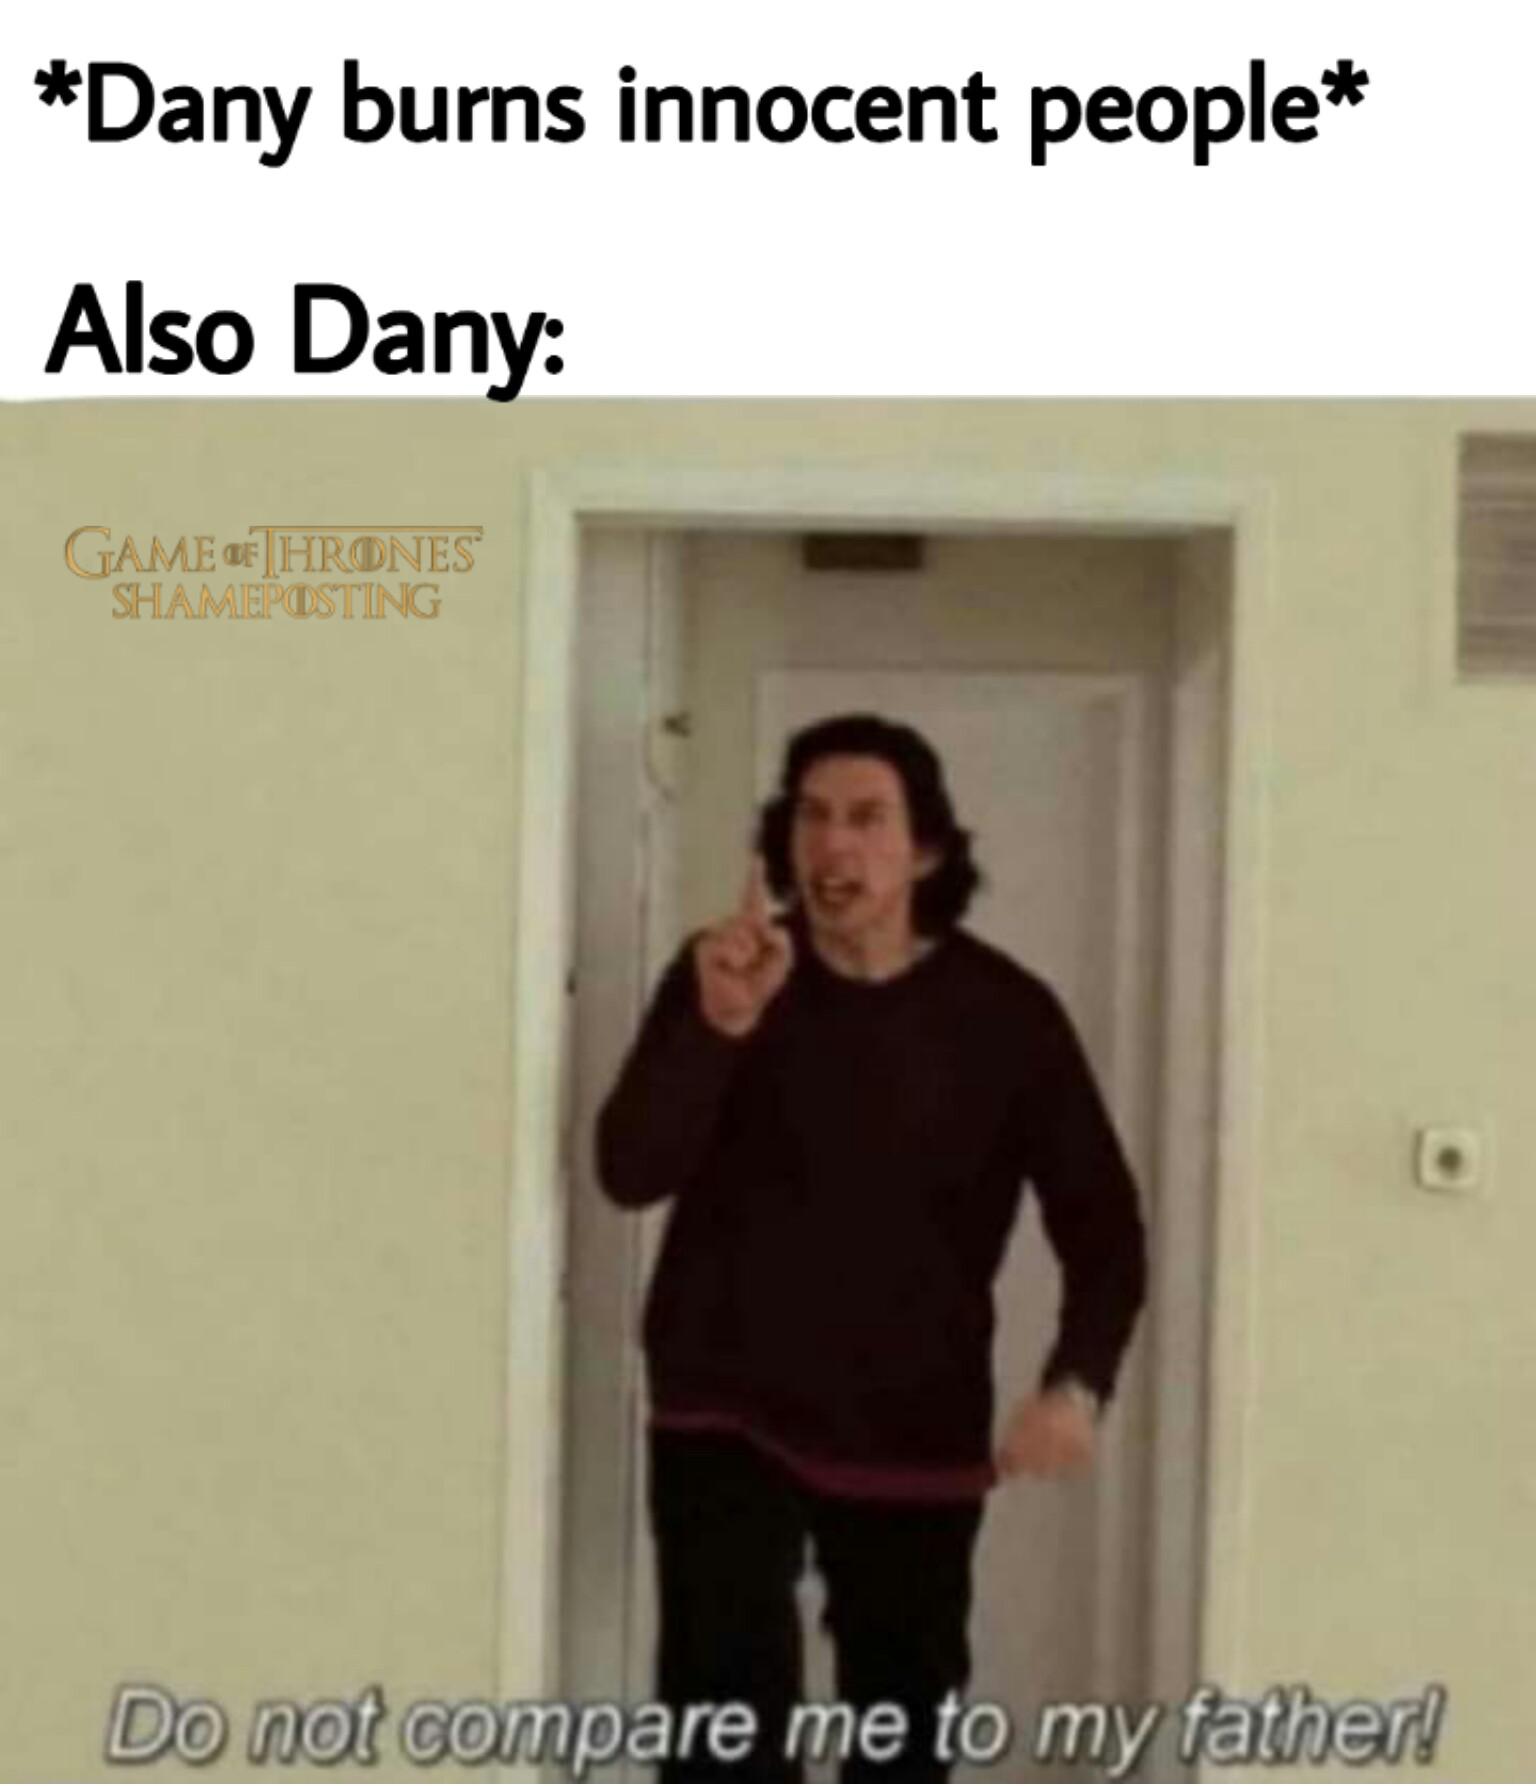 D-n-d, Daenerys, King, Dany, Landing, Cersei Game of thrones memes D-n-d, Daenerys, King, Dany, Landing, Cersei text: *Dany burns innocent people* Also Dany: /Db nt5t- compare me to myfäÜeTTi 